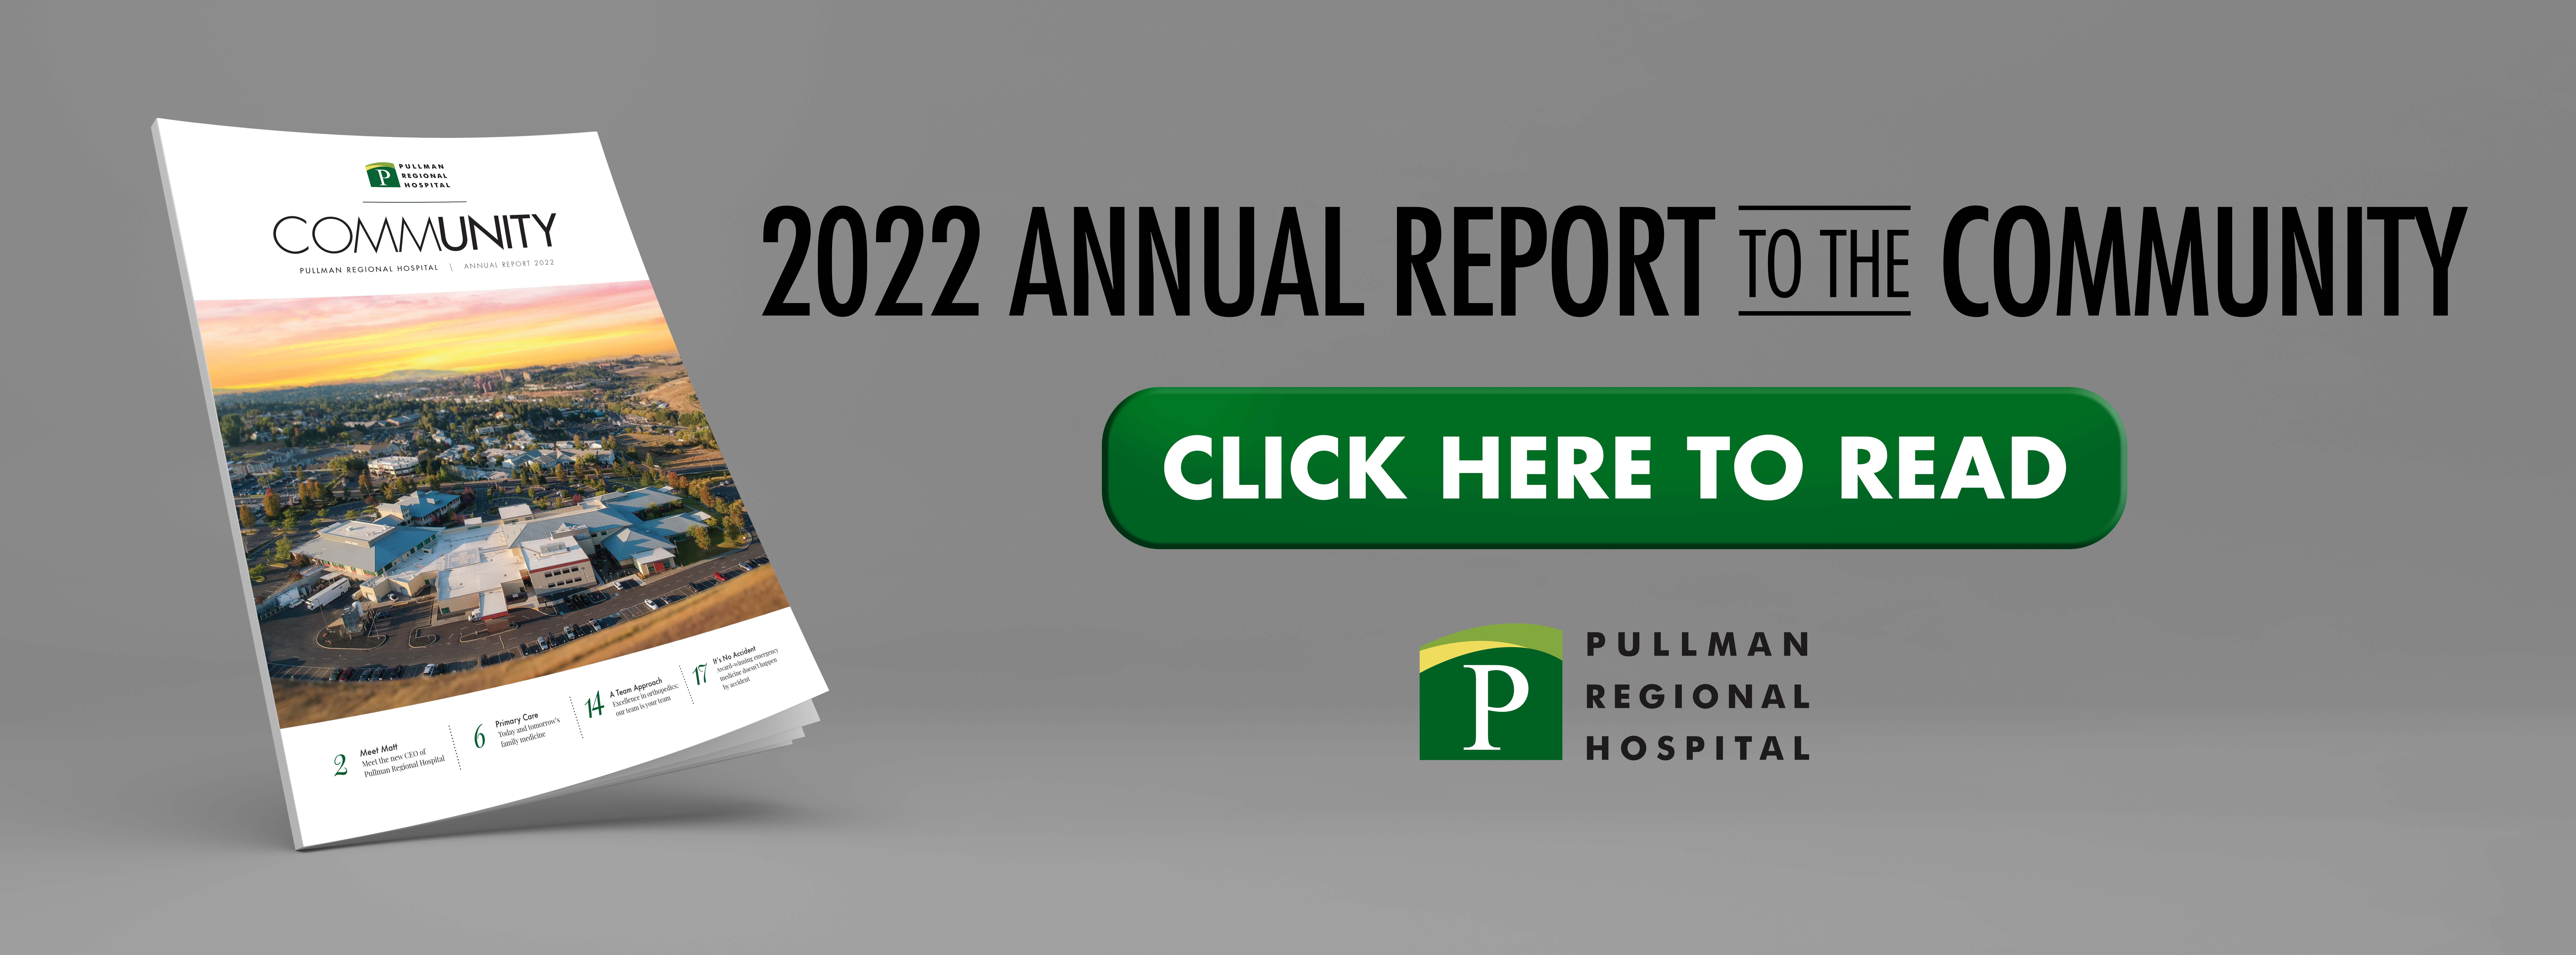 Annual report read now